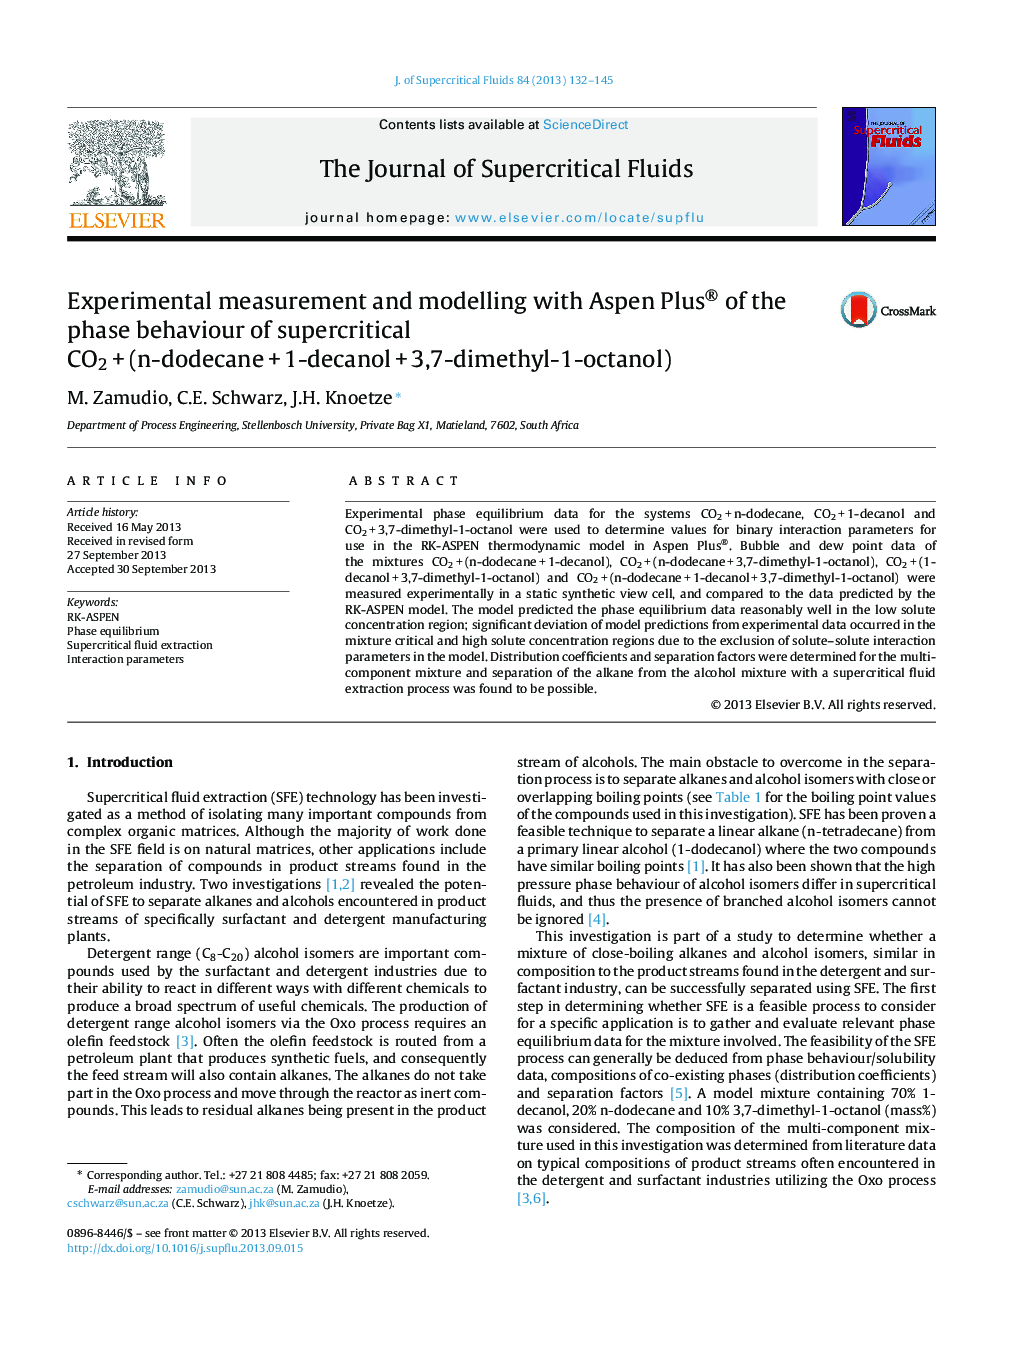 Experimental measurement and modelling with Aspen Plus® of the phase behaviour of supercritical CO2 + (n-dodecane + 1-decanol + 3,7-dimethyl-1-octanol)